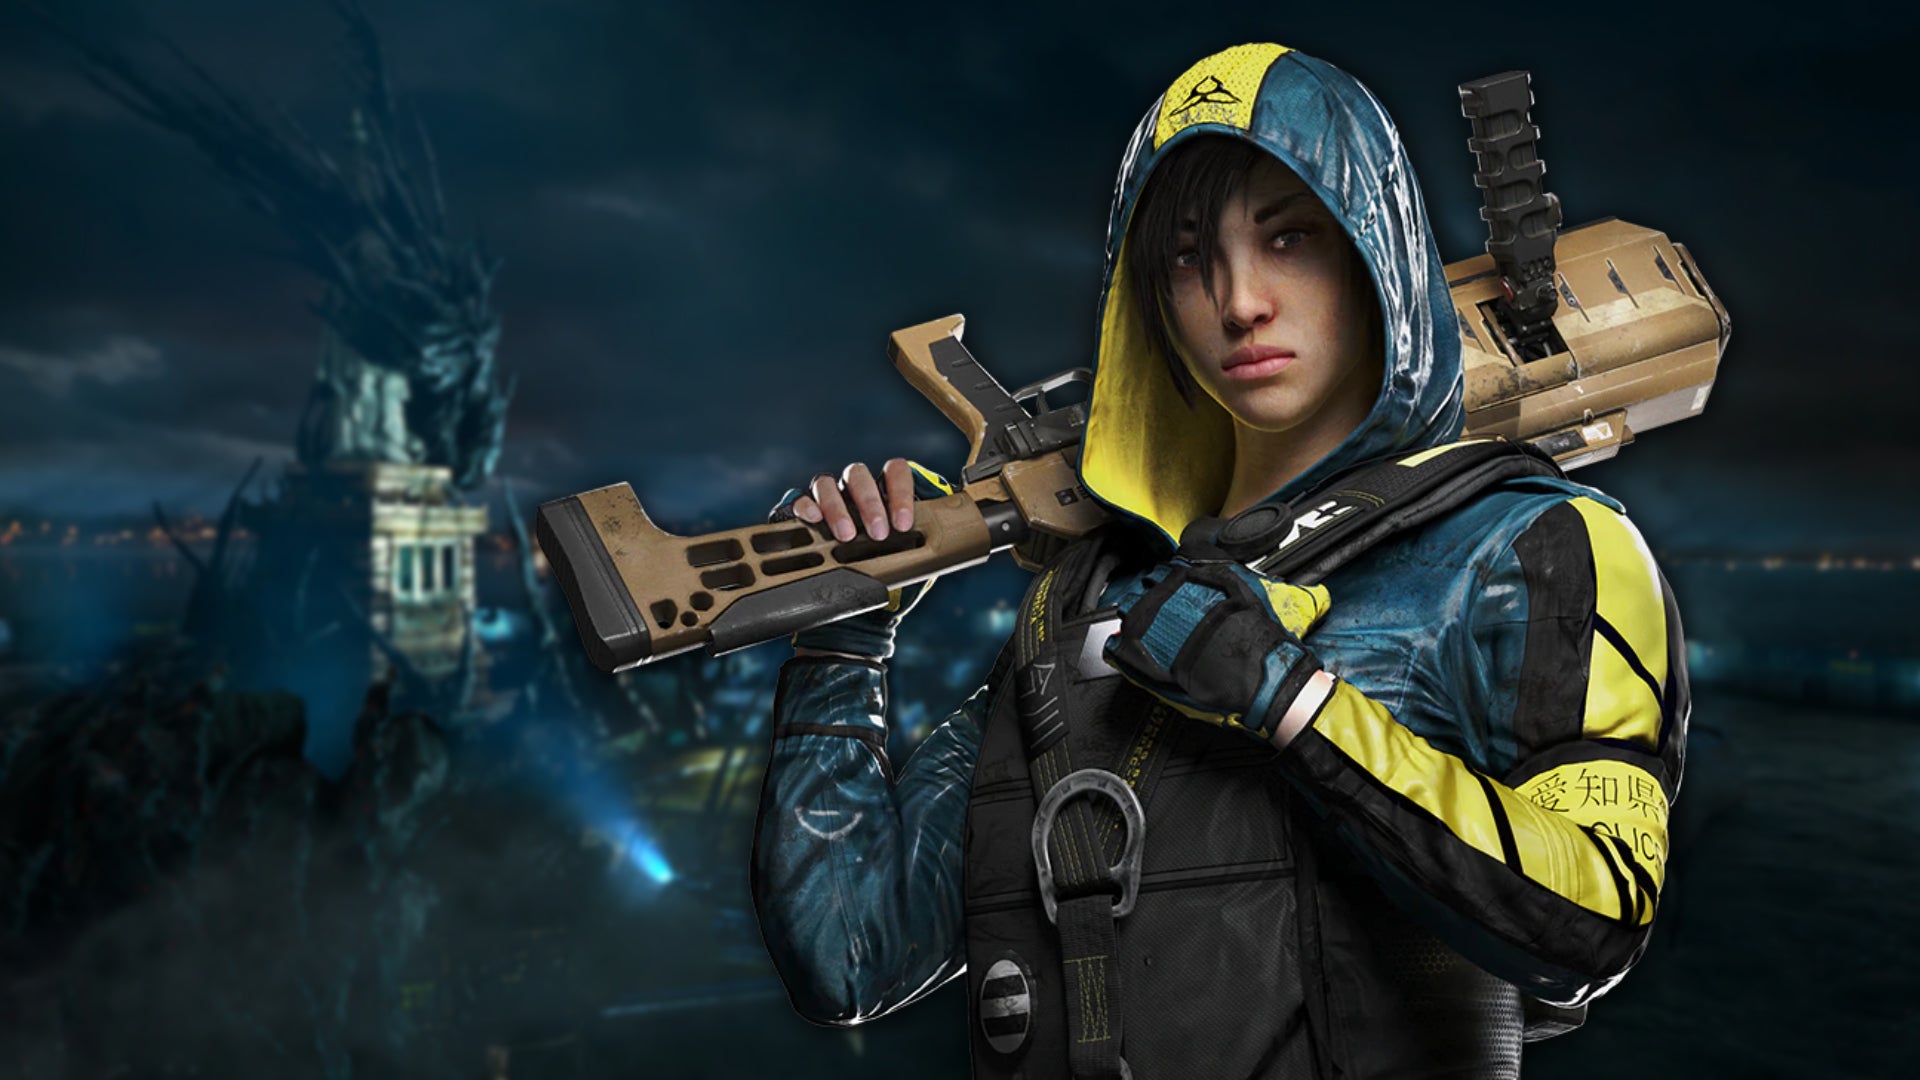 Promotional art of Hibana, one of the playable Operators in Rainbow Six Extraction, superimposed on a backdrop of a ruined Liberty Island.